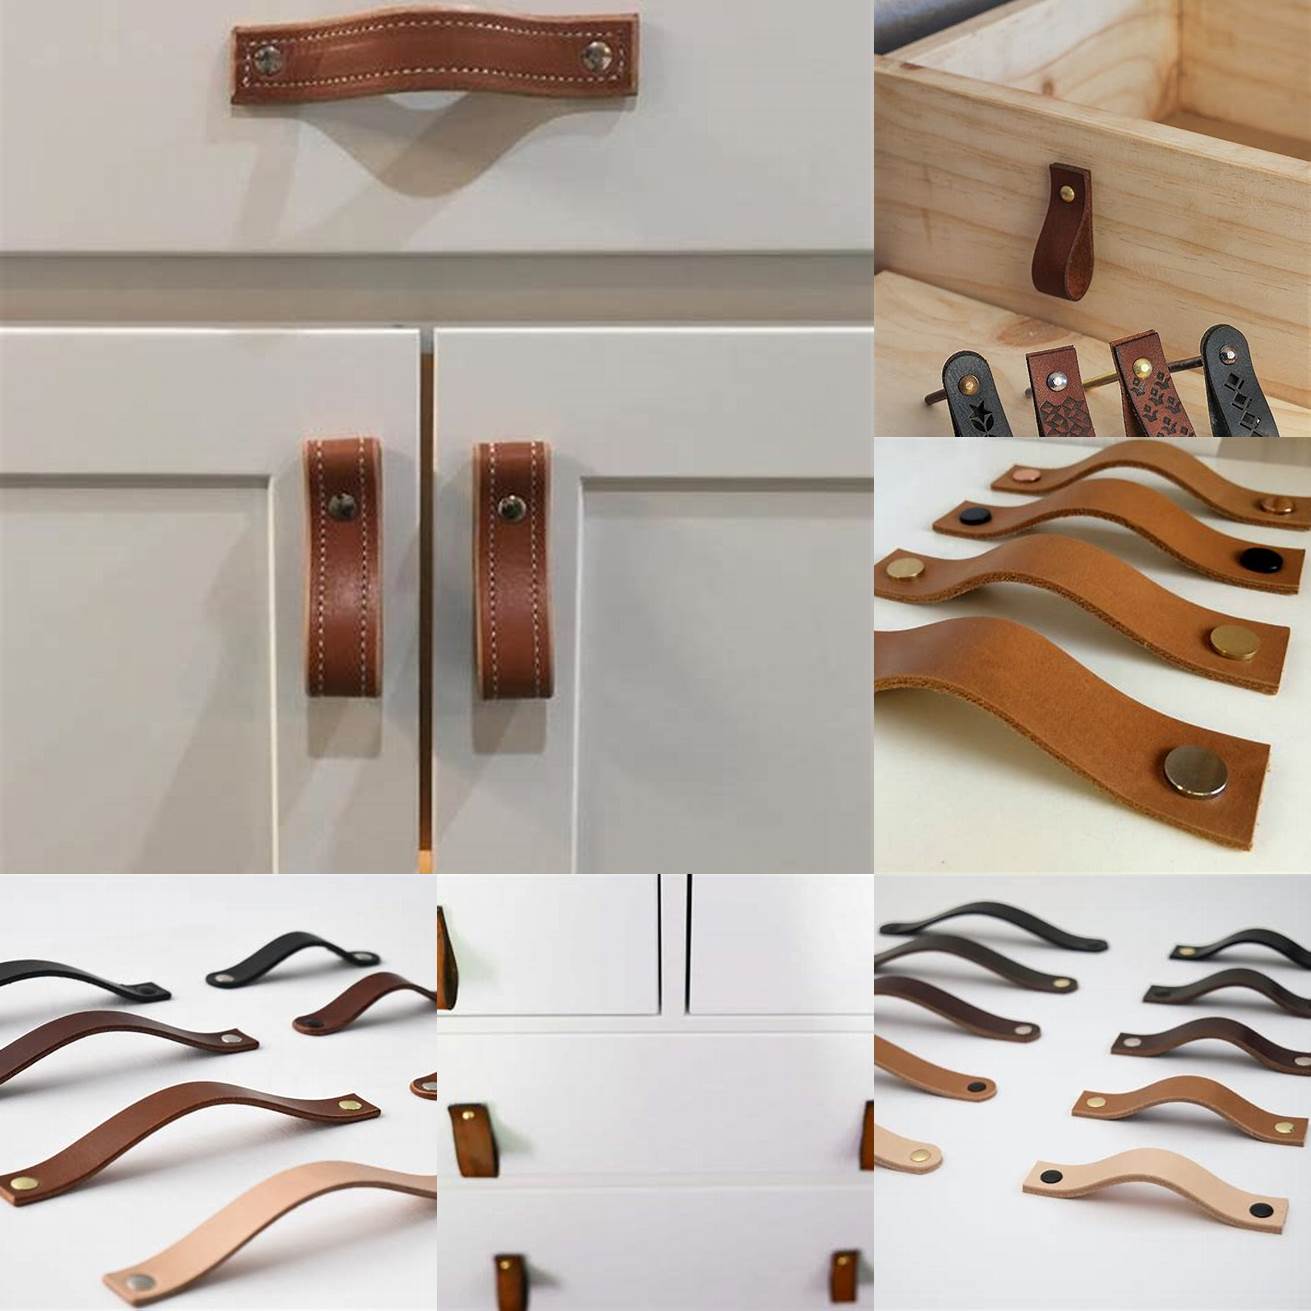 Leather Pulls If youre looking for a unique and tactile option leather pulls on white or light-colored cabinets can create a textural and interesting look This is a great option for those who love a bohemian or eclectic feel